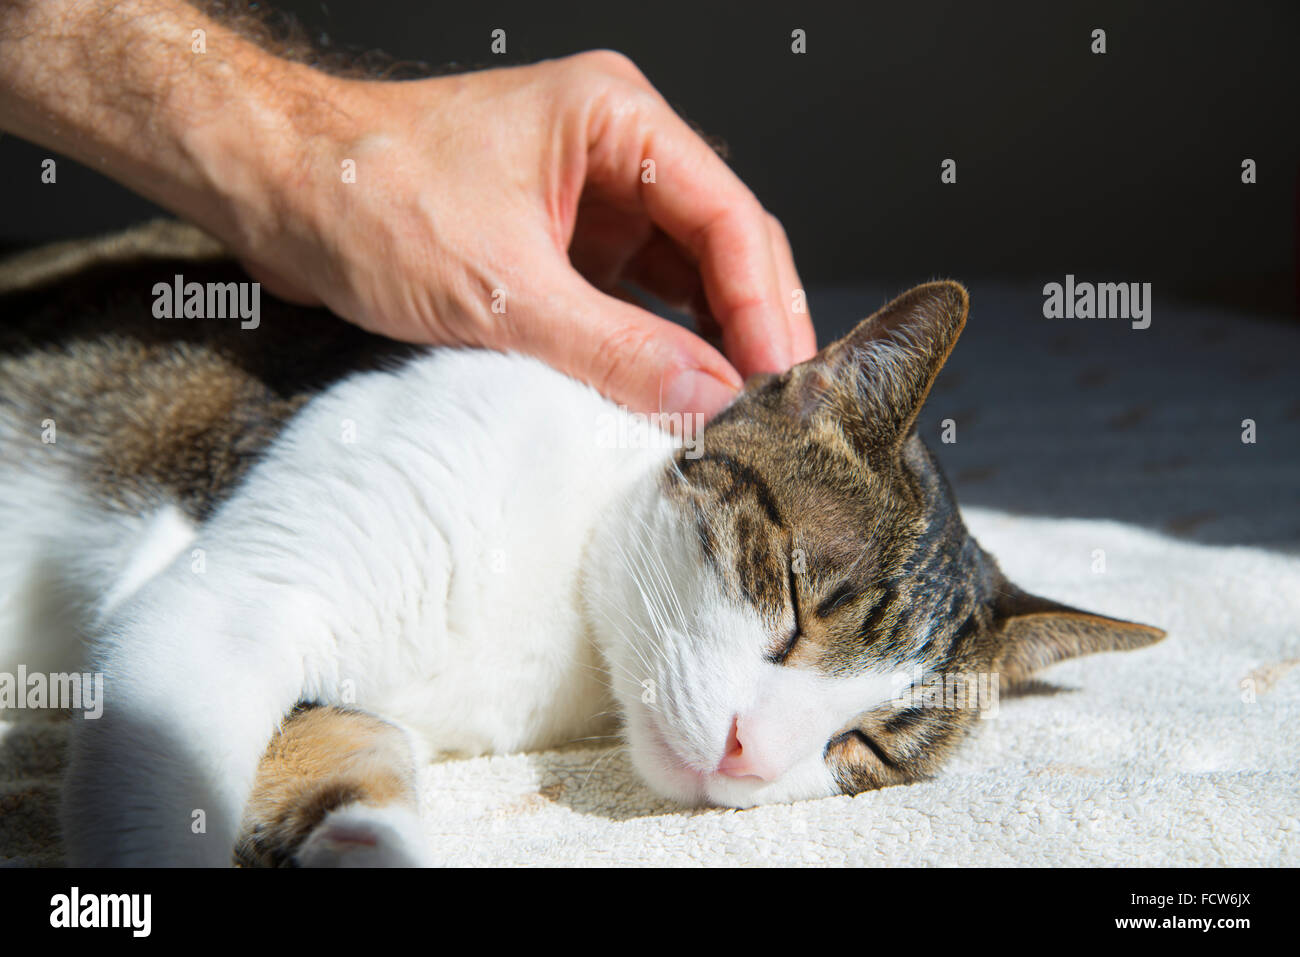 Man's hand stroking cat's head while he is sleeping. Close view. Stock Photo